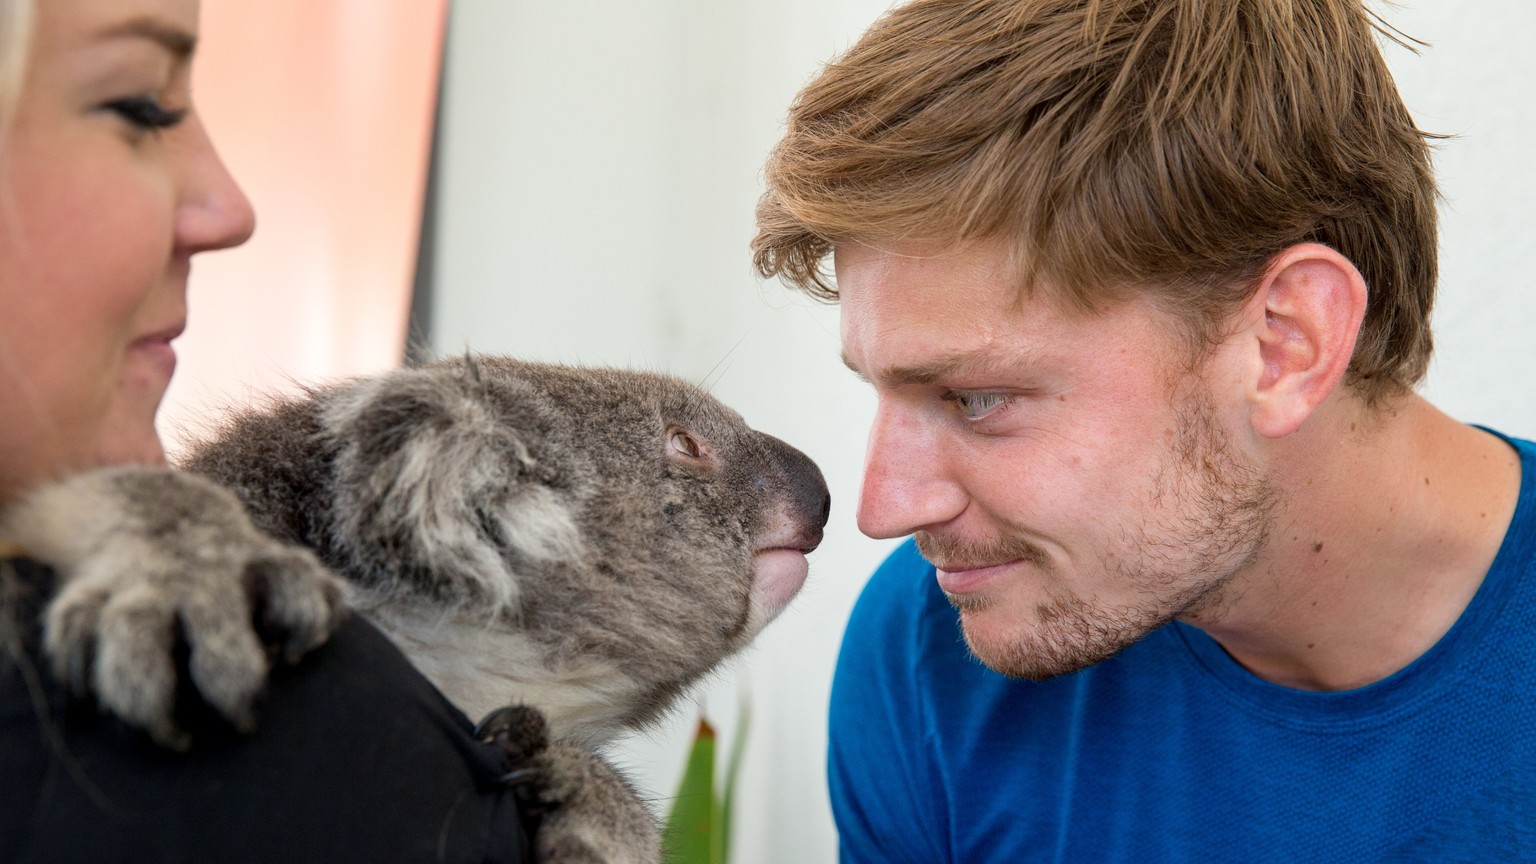 epa06445581 A handout photo made available by Tennis Australia shows tennis player David Goffin (R) of Belgium meeting a koala at Melbourne Park, during the Australian Open tennis tournament, in Melbo ...